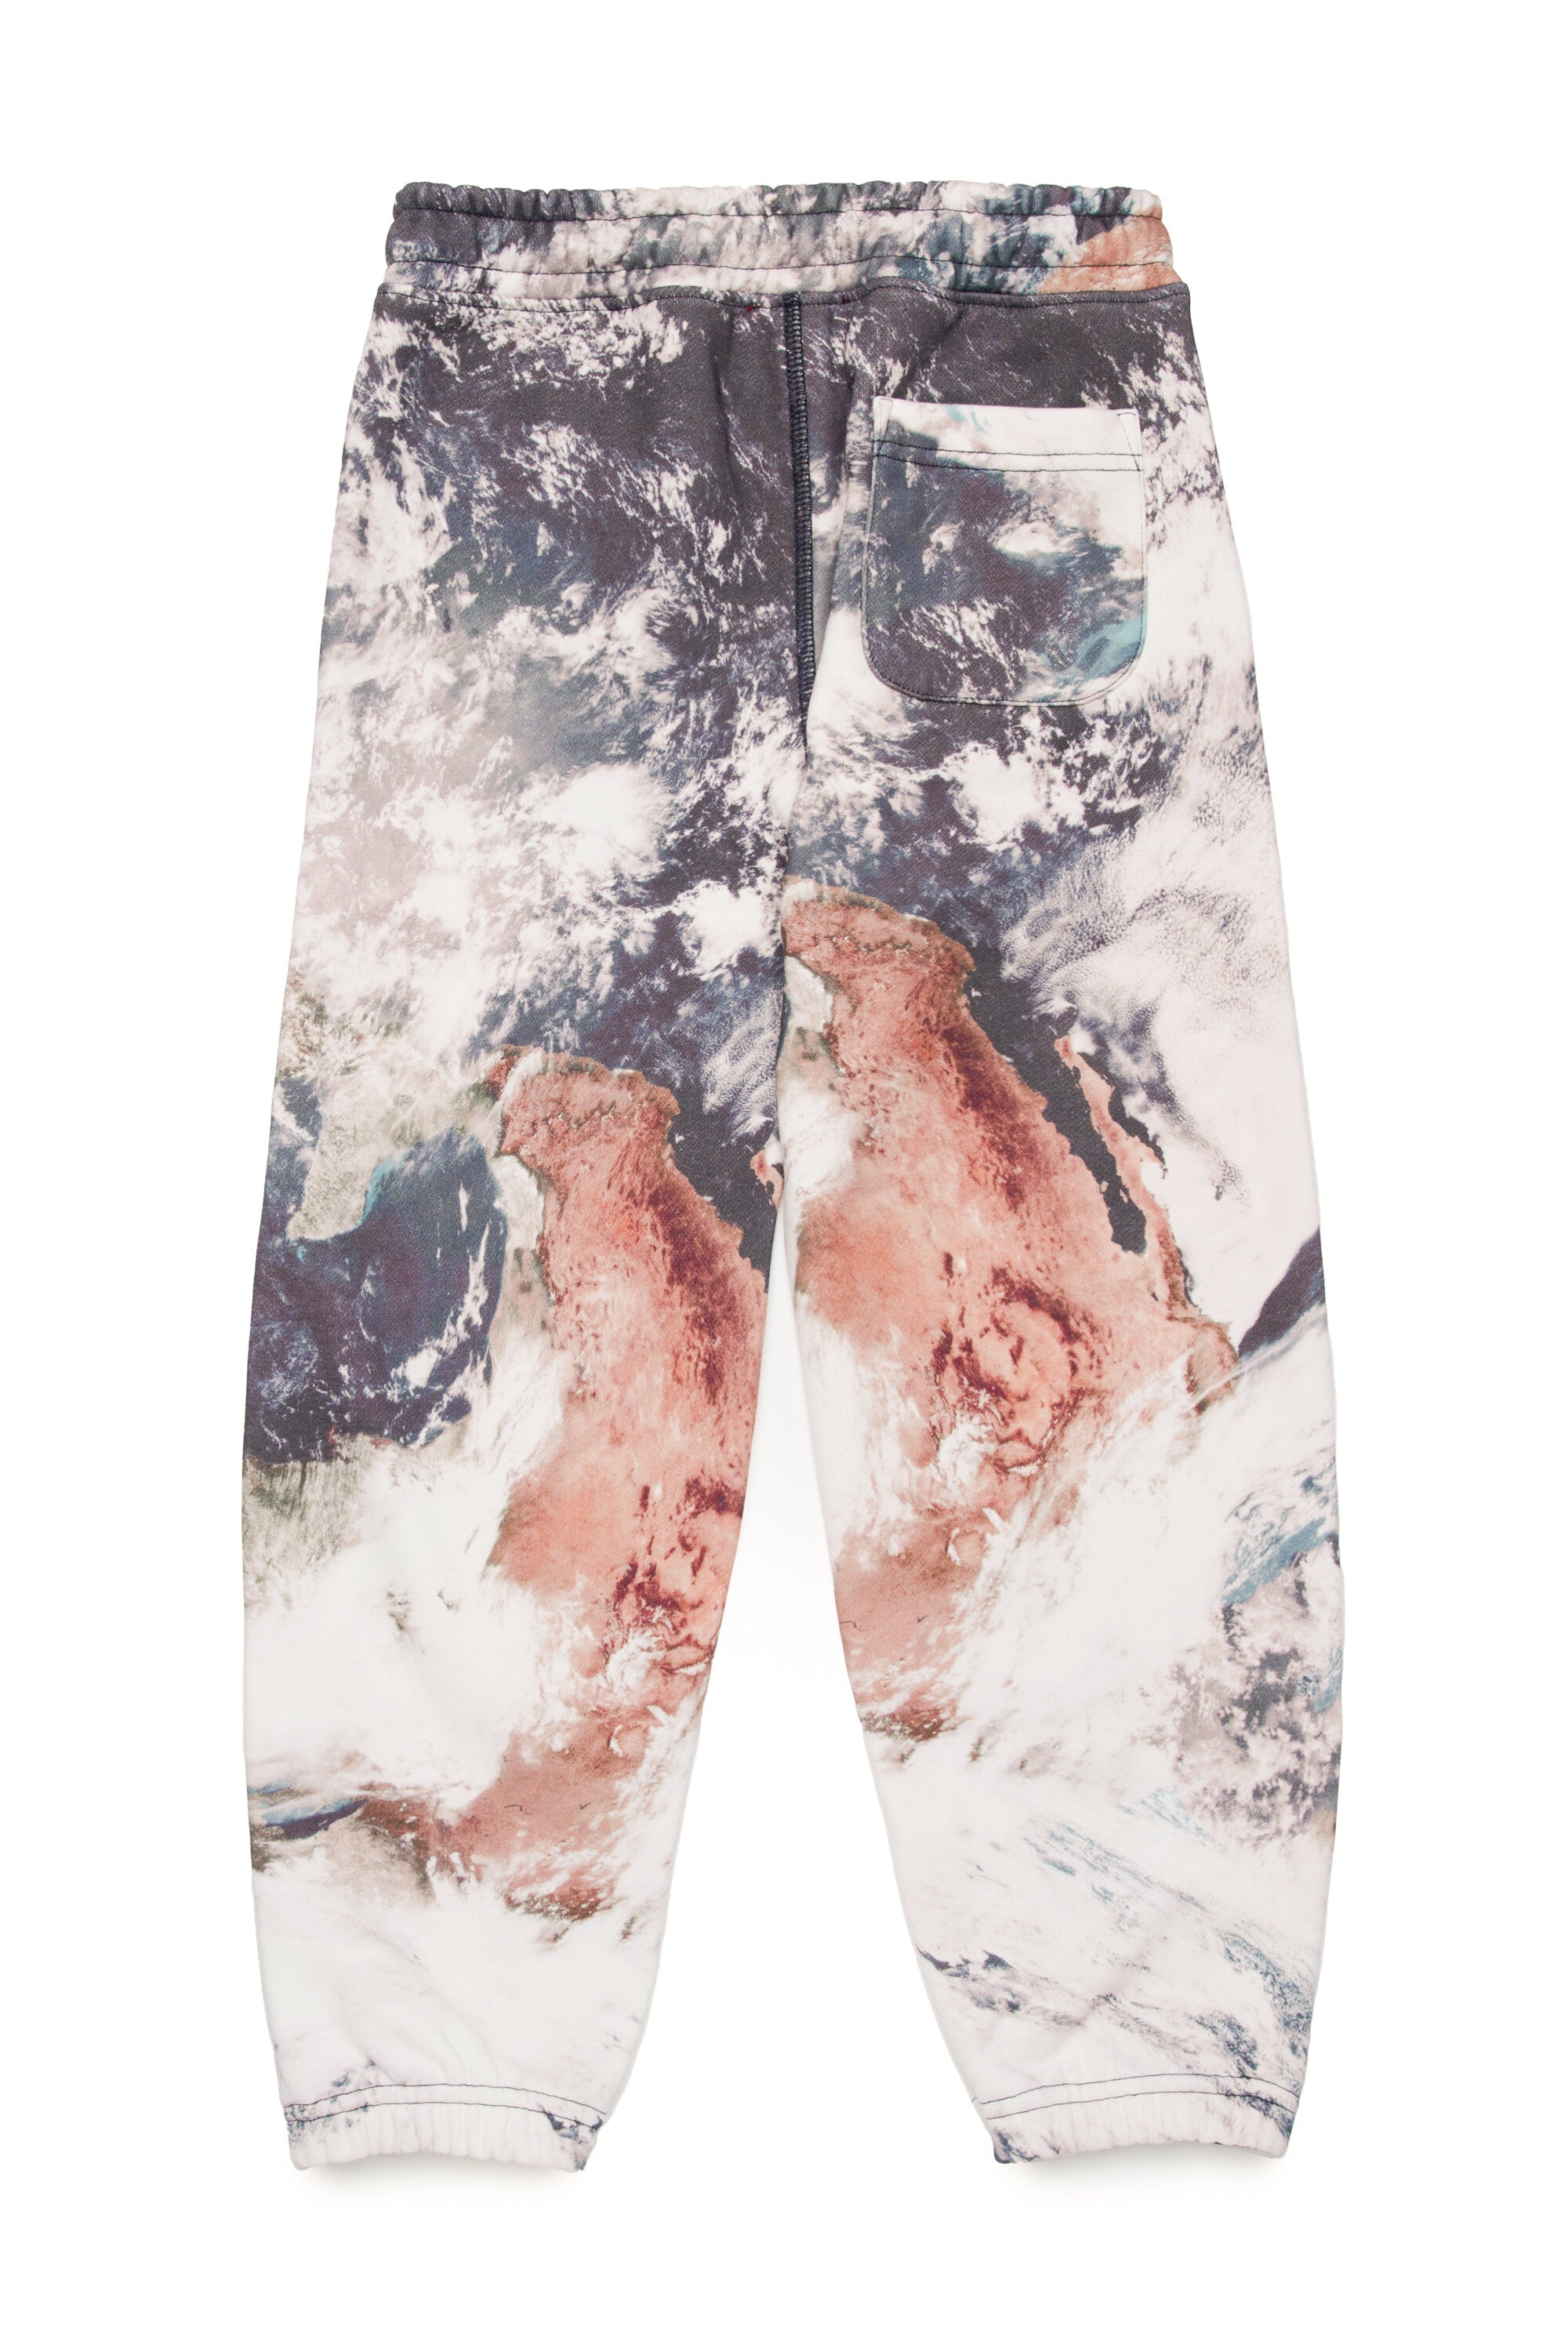 All-over Planet Camou jogger trousers